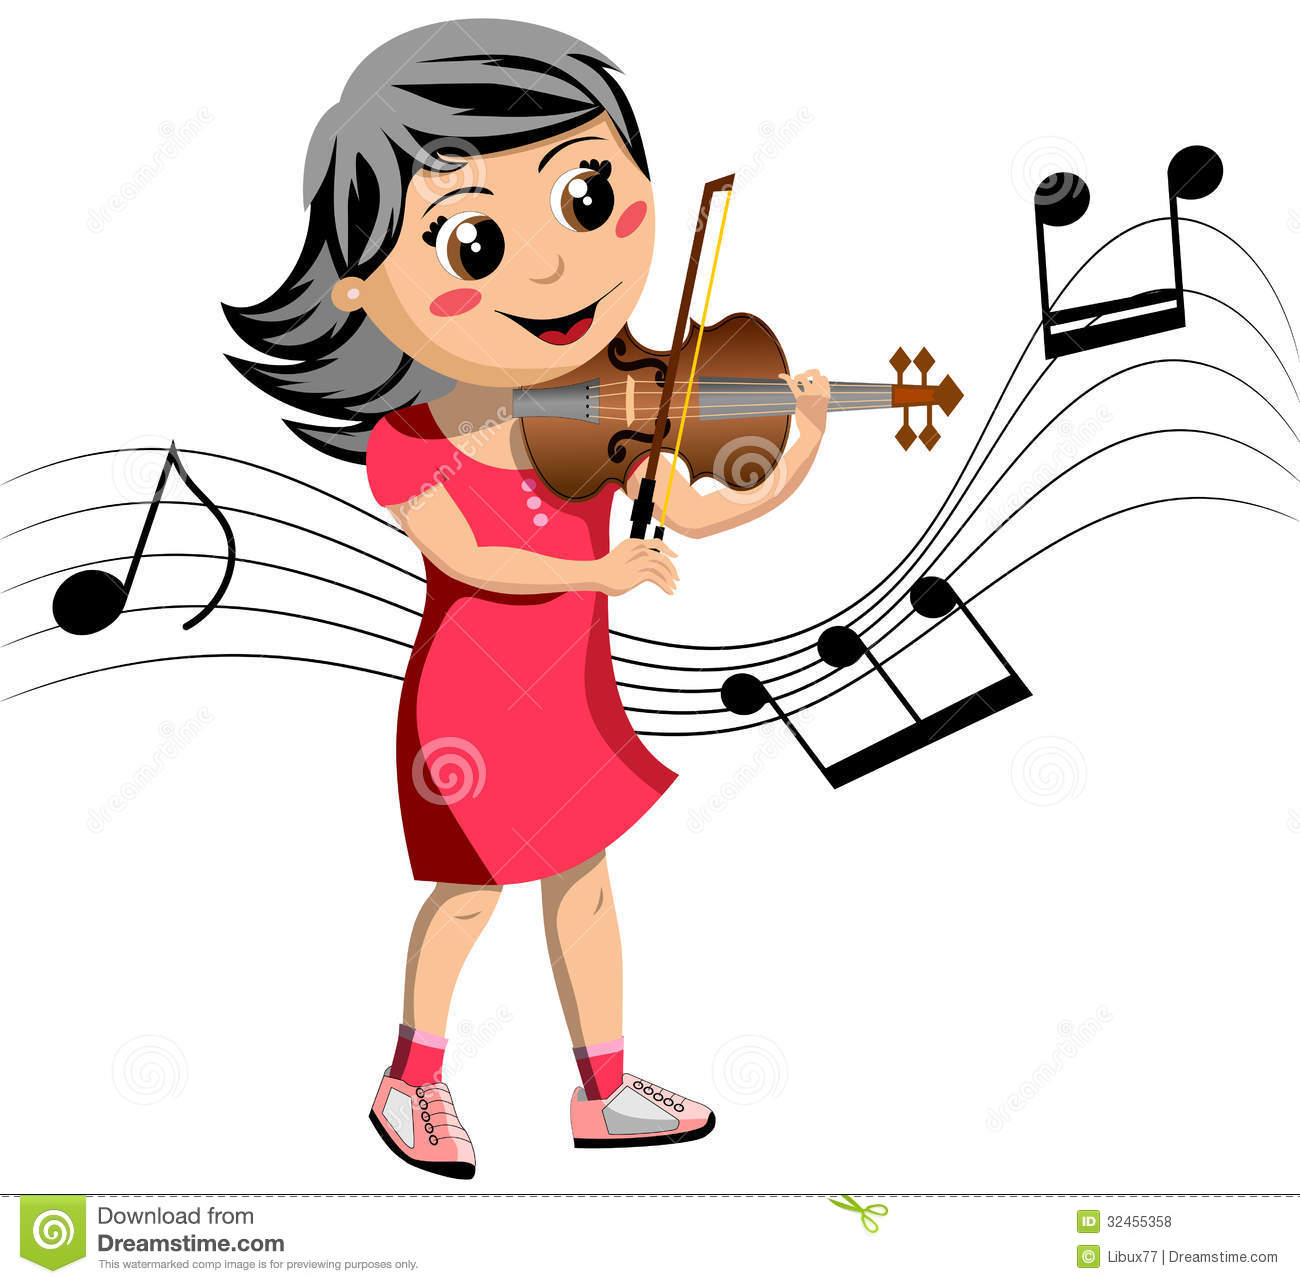 Illustration Featuring A Cute Happy Girl Playing Violin Isolated On